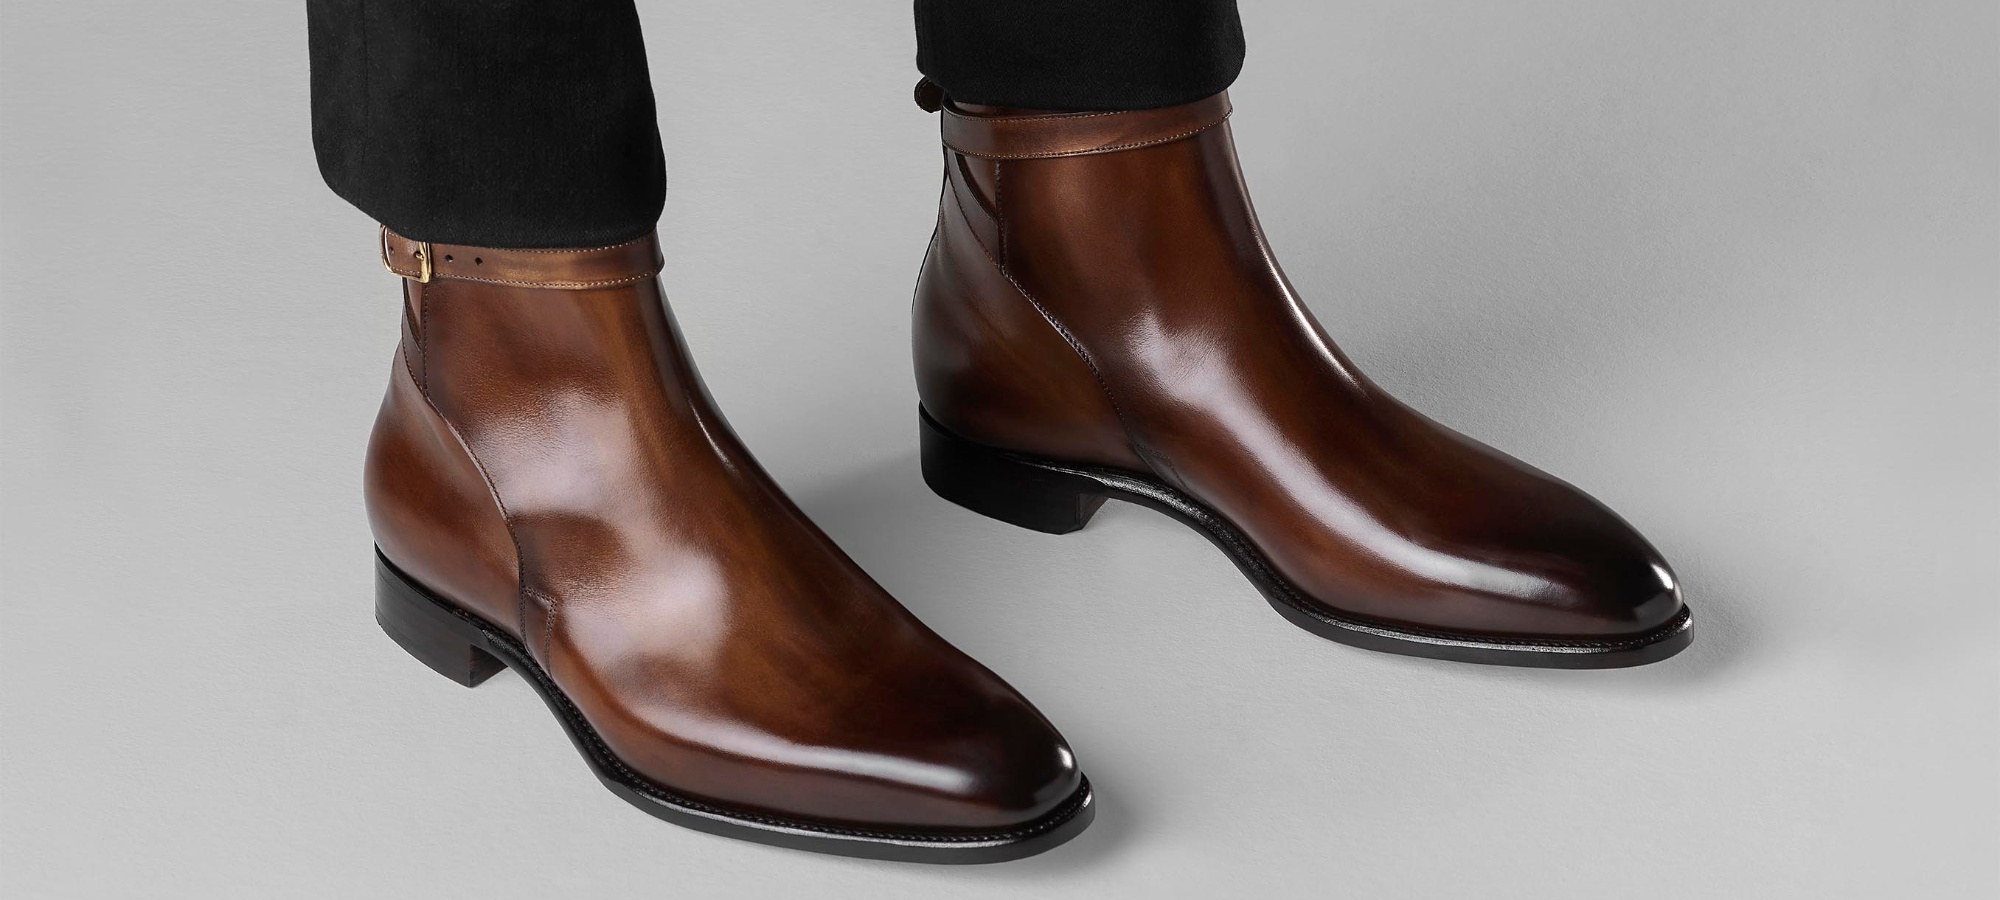 jodhpur boots with suit